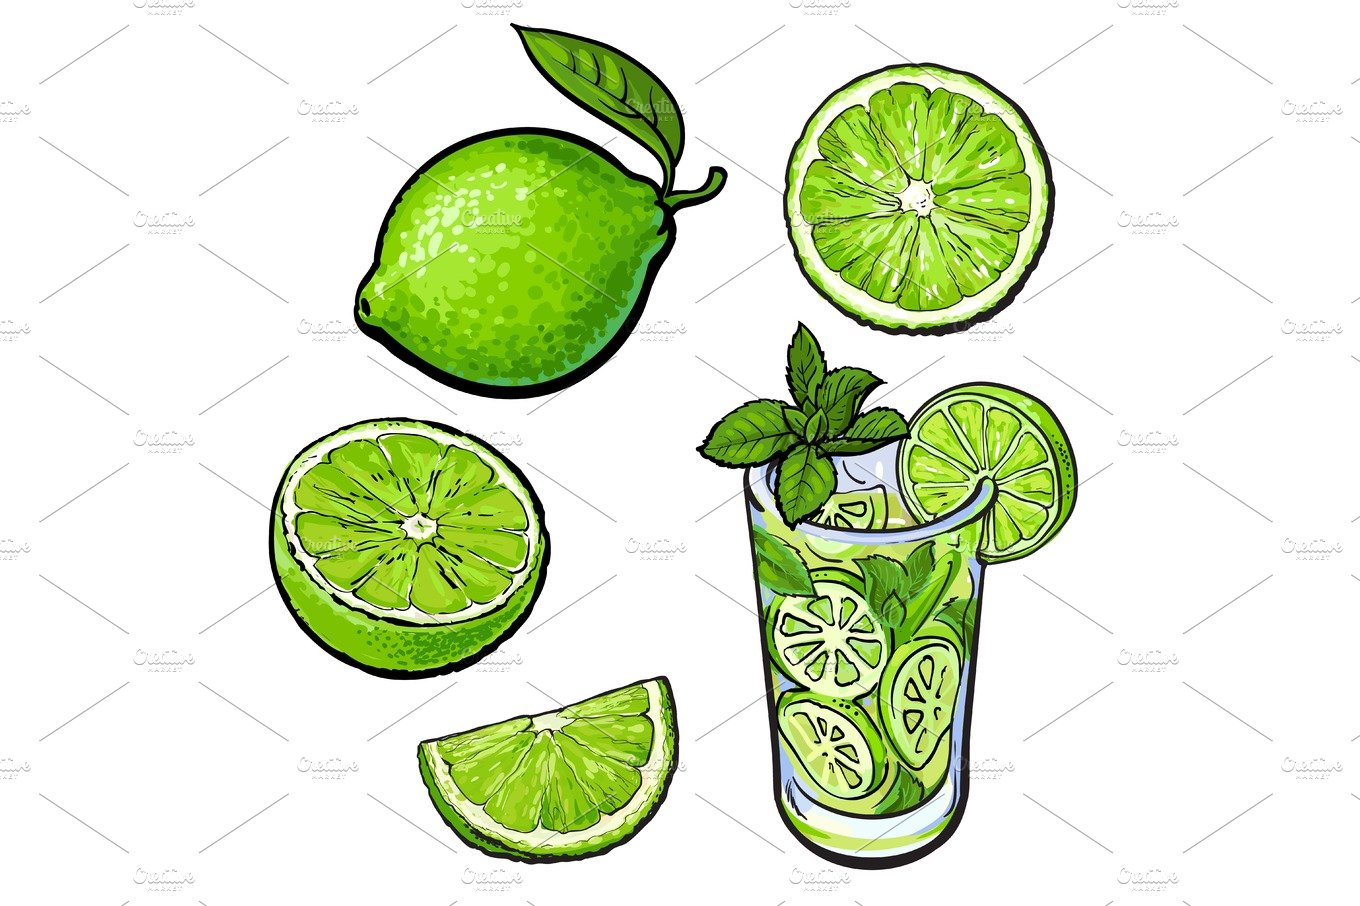 Whole, half, quarter lime and glass of lemonade with ice cover image.